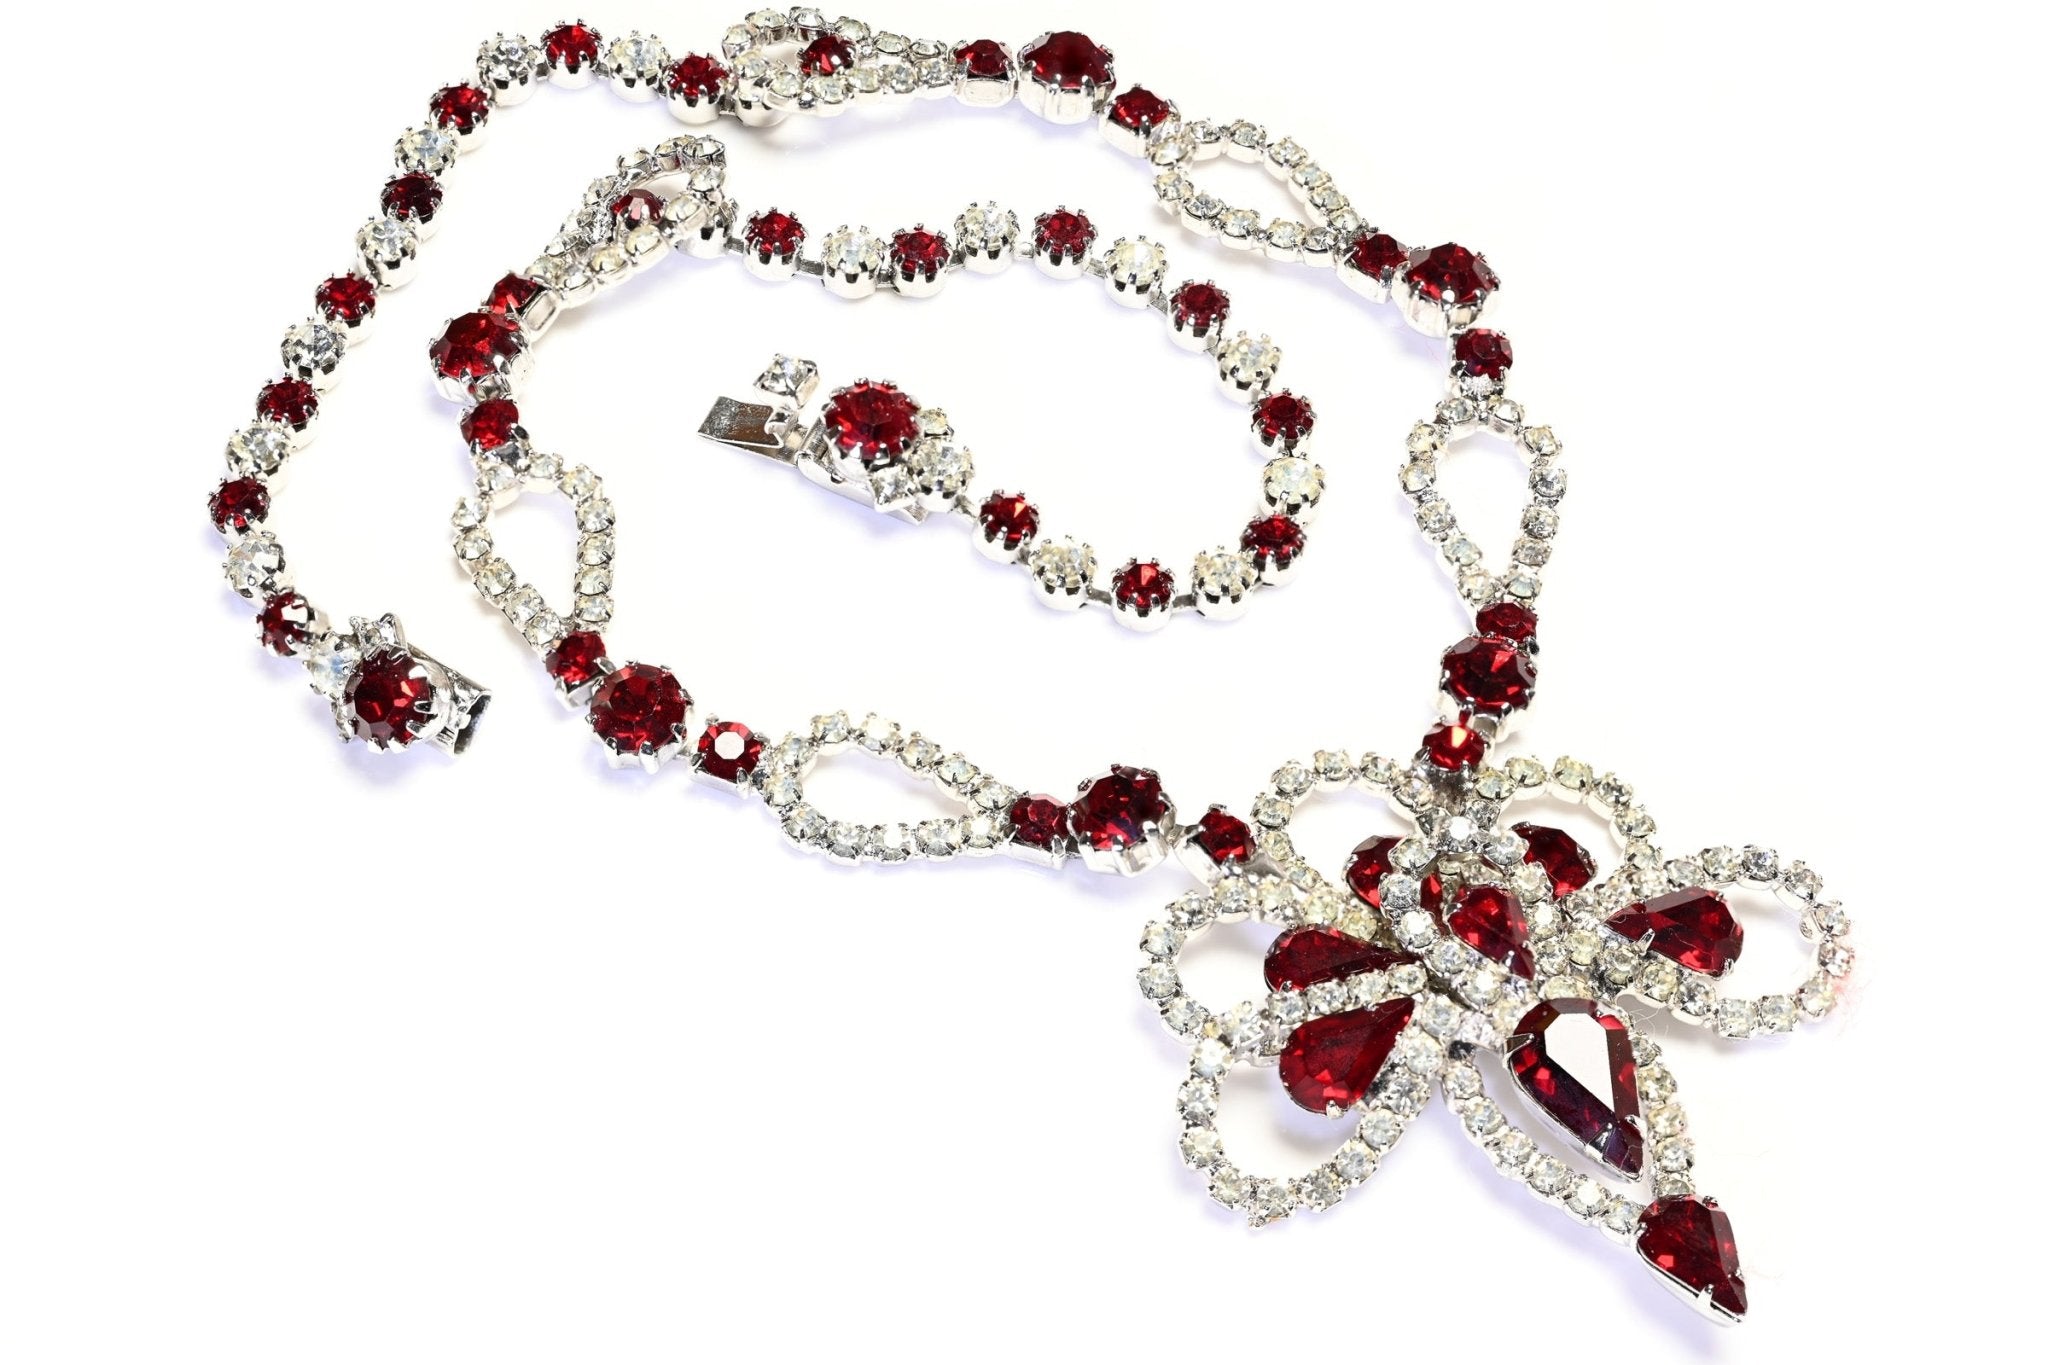 Vintage 1950’s Retro Rhodium Plated Red Crystal Flower Necklace